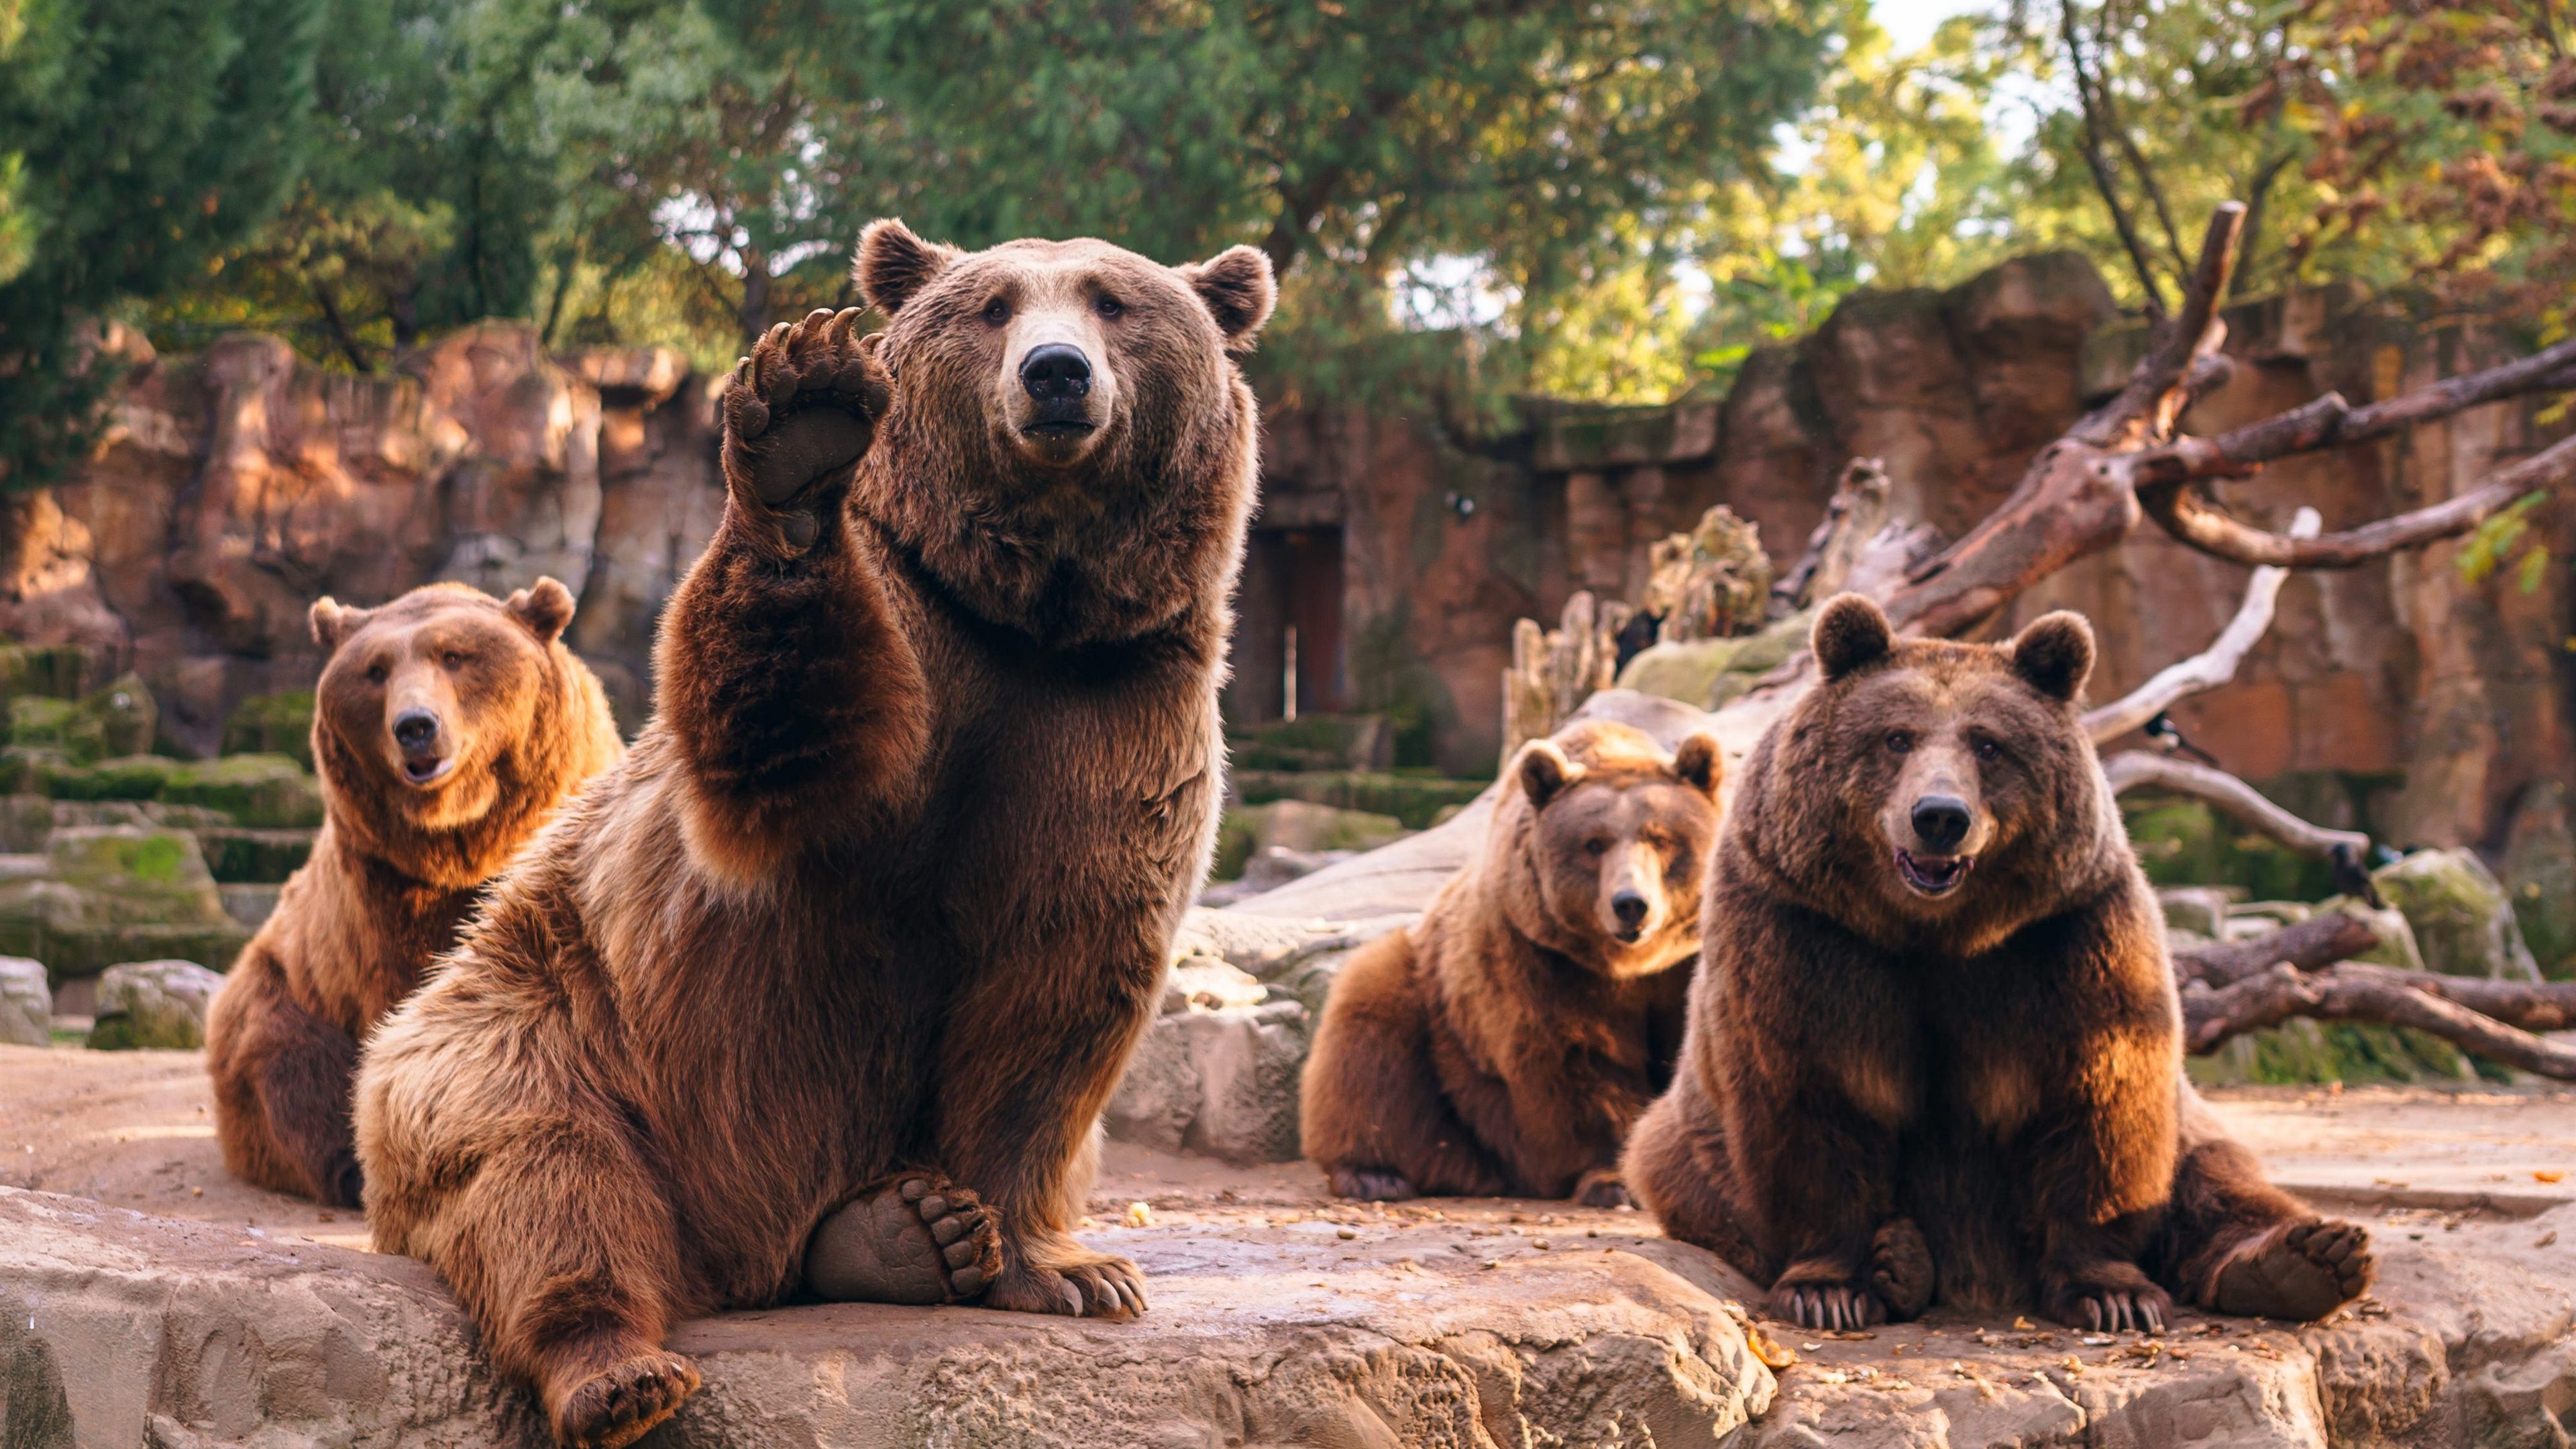 Wallpaper Four brown bears, stones 3840x2160 UHD 4K Picture, Image